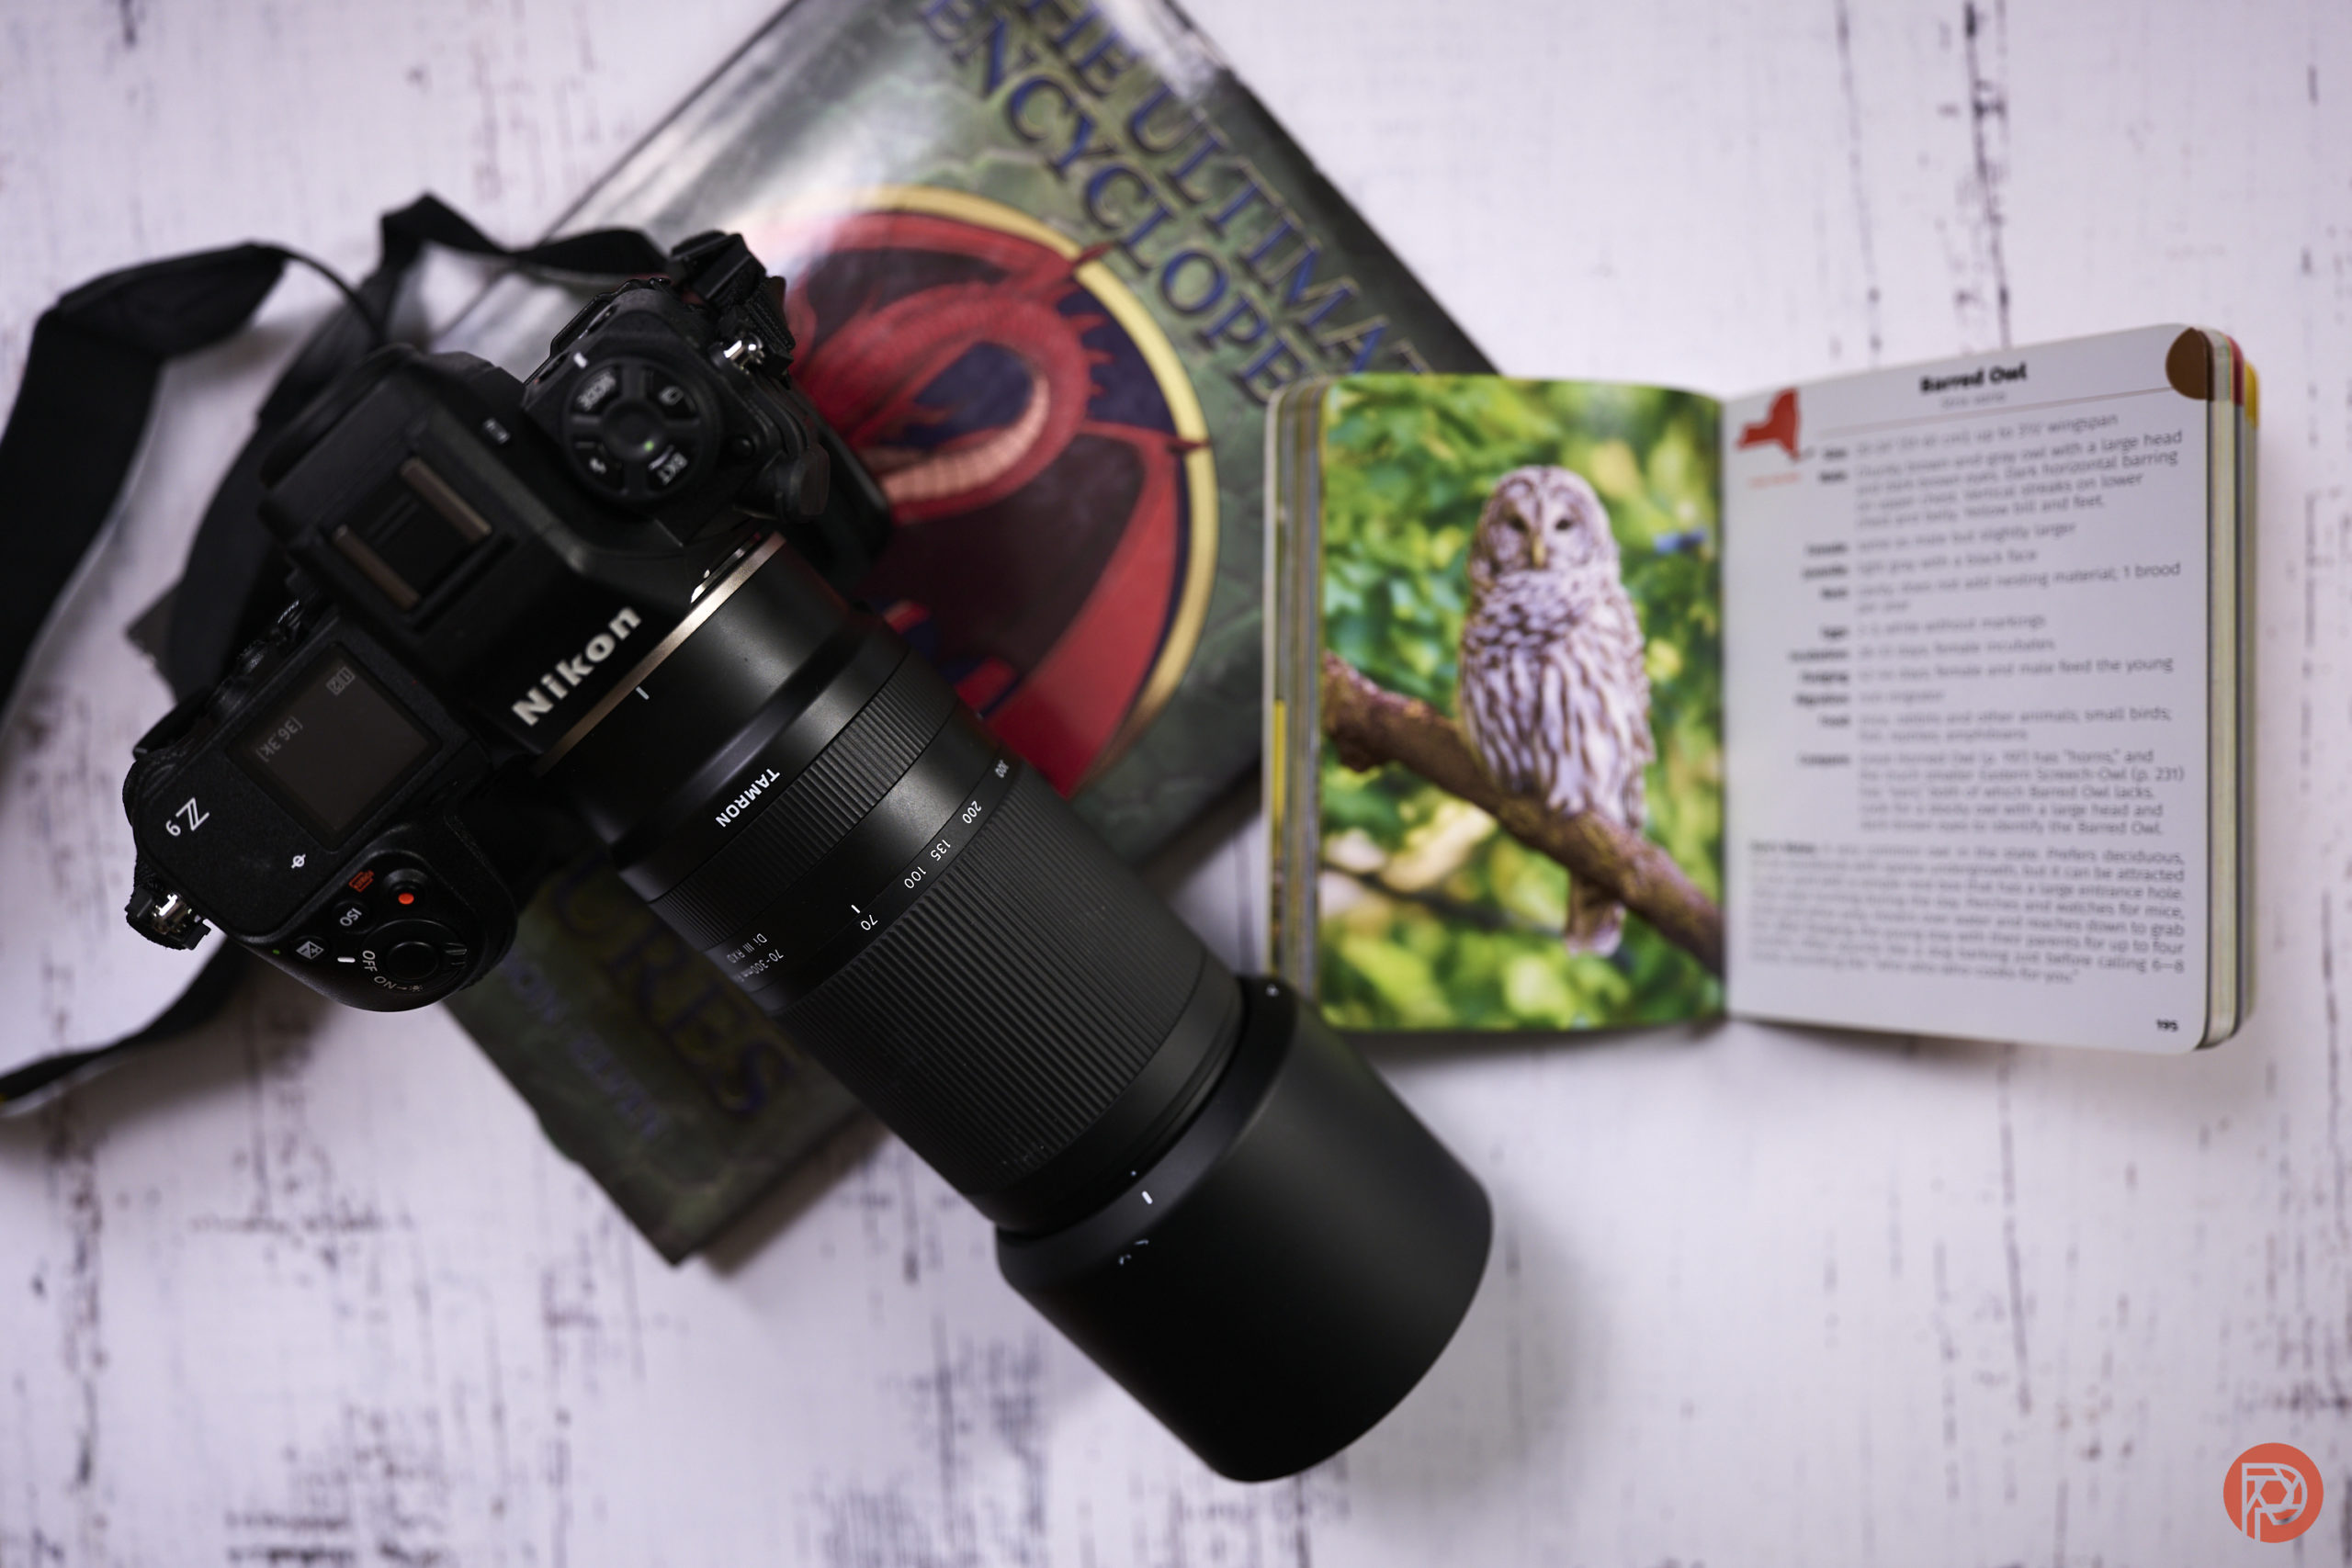 How’s the Tamron 70-300mm on the Nikon Z9?